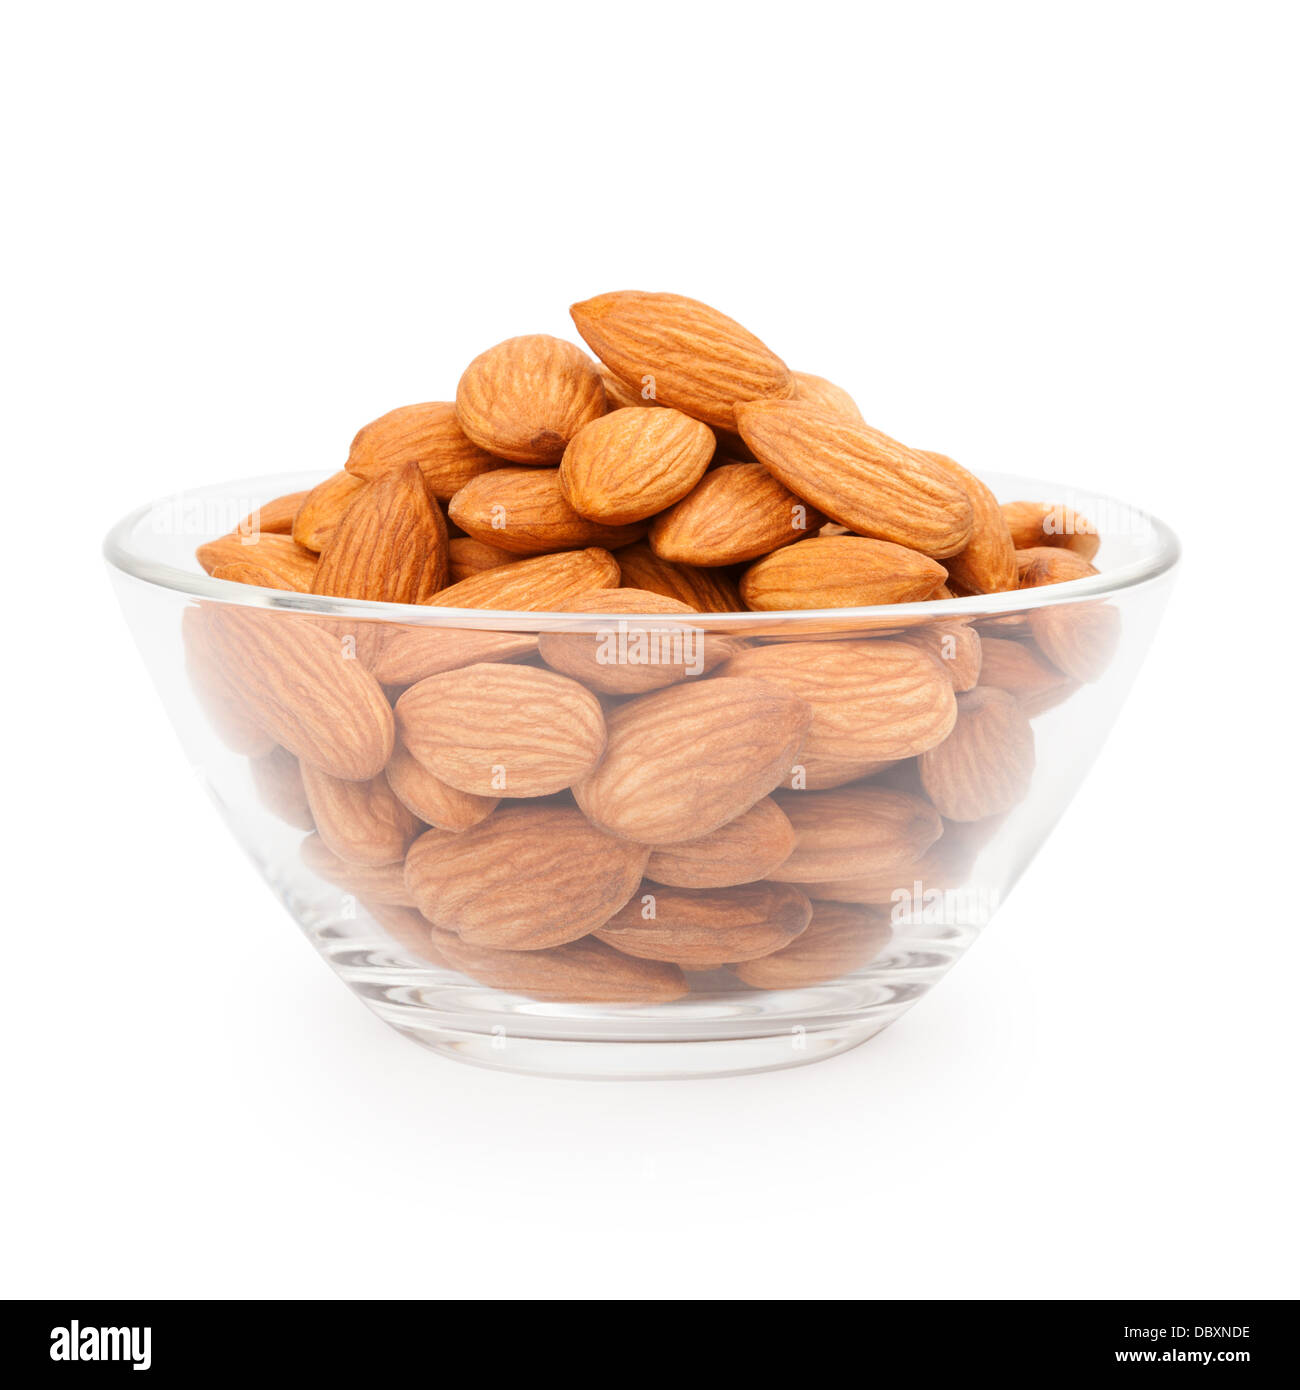 Bowl With Almonds Stock Photo